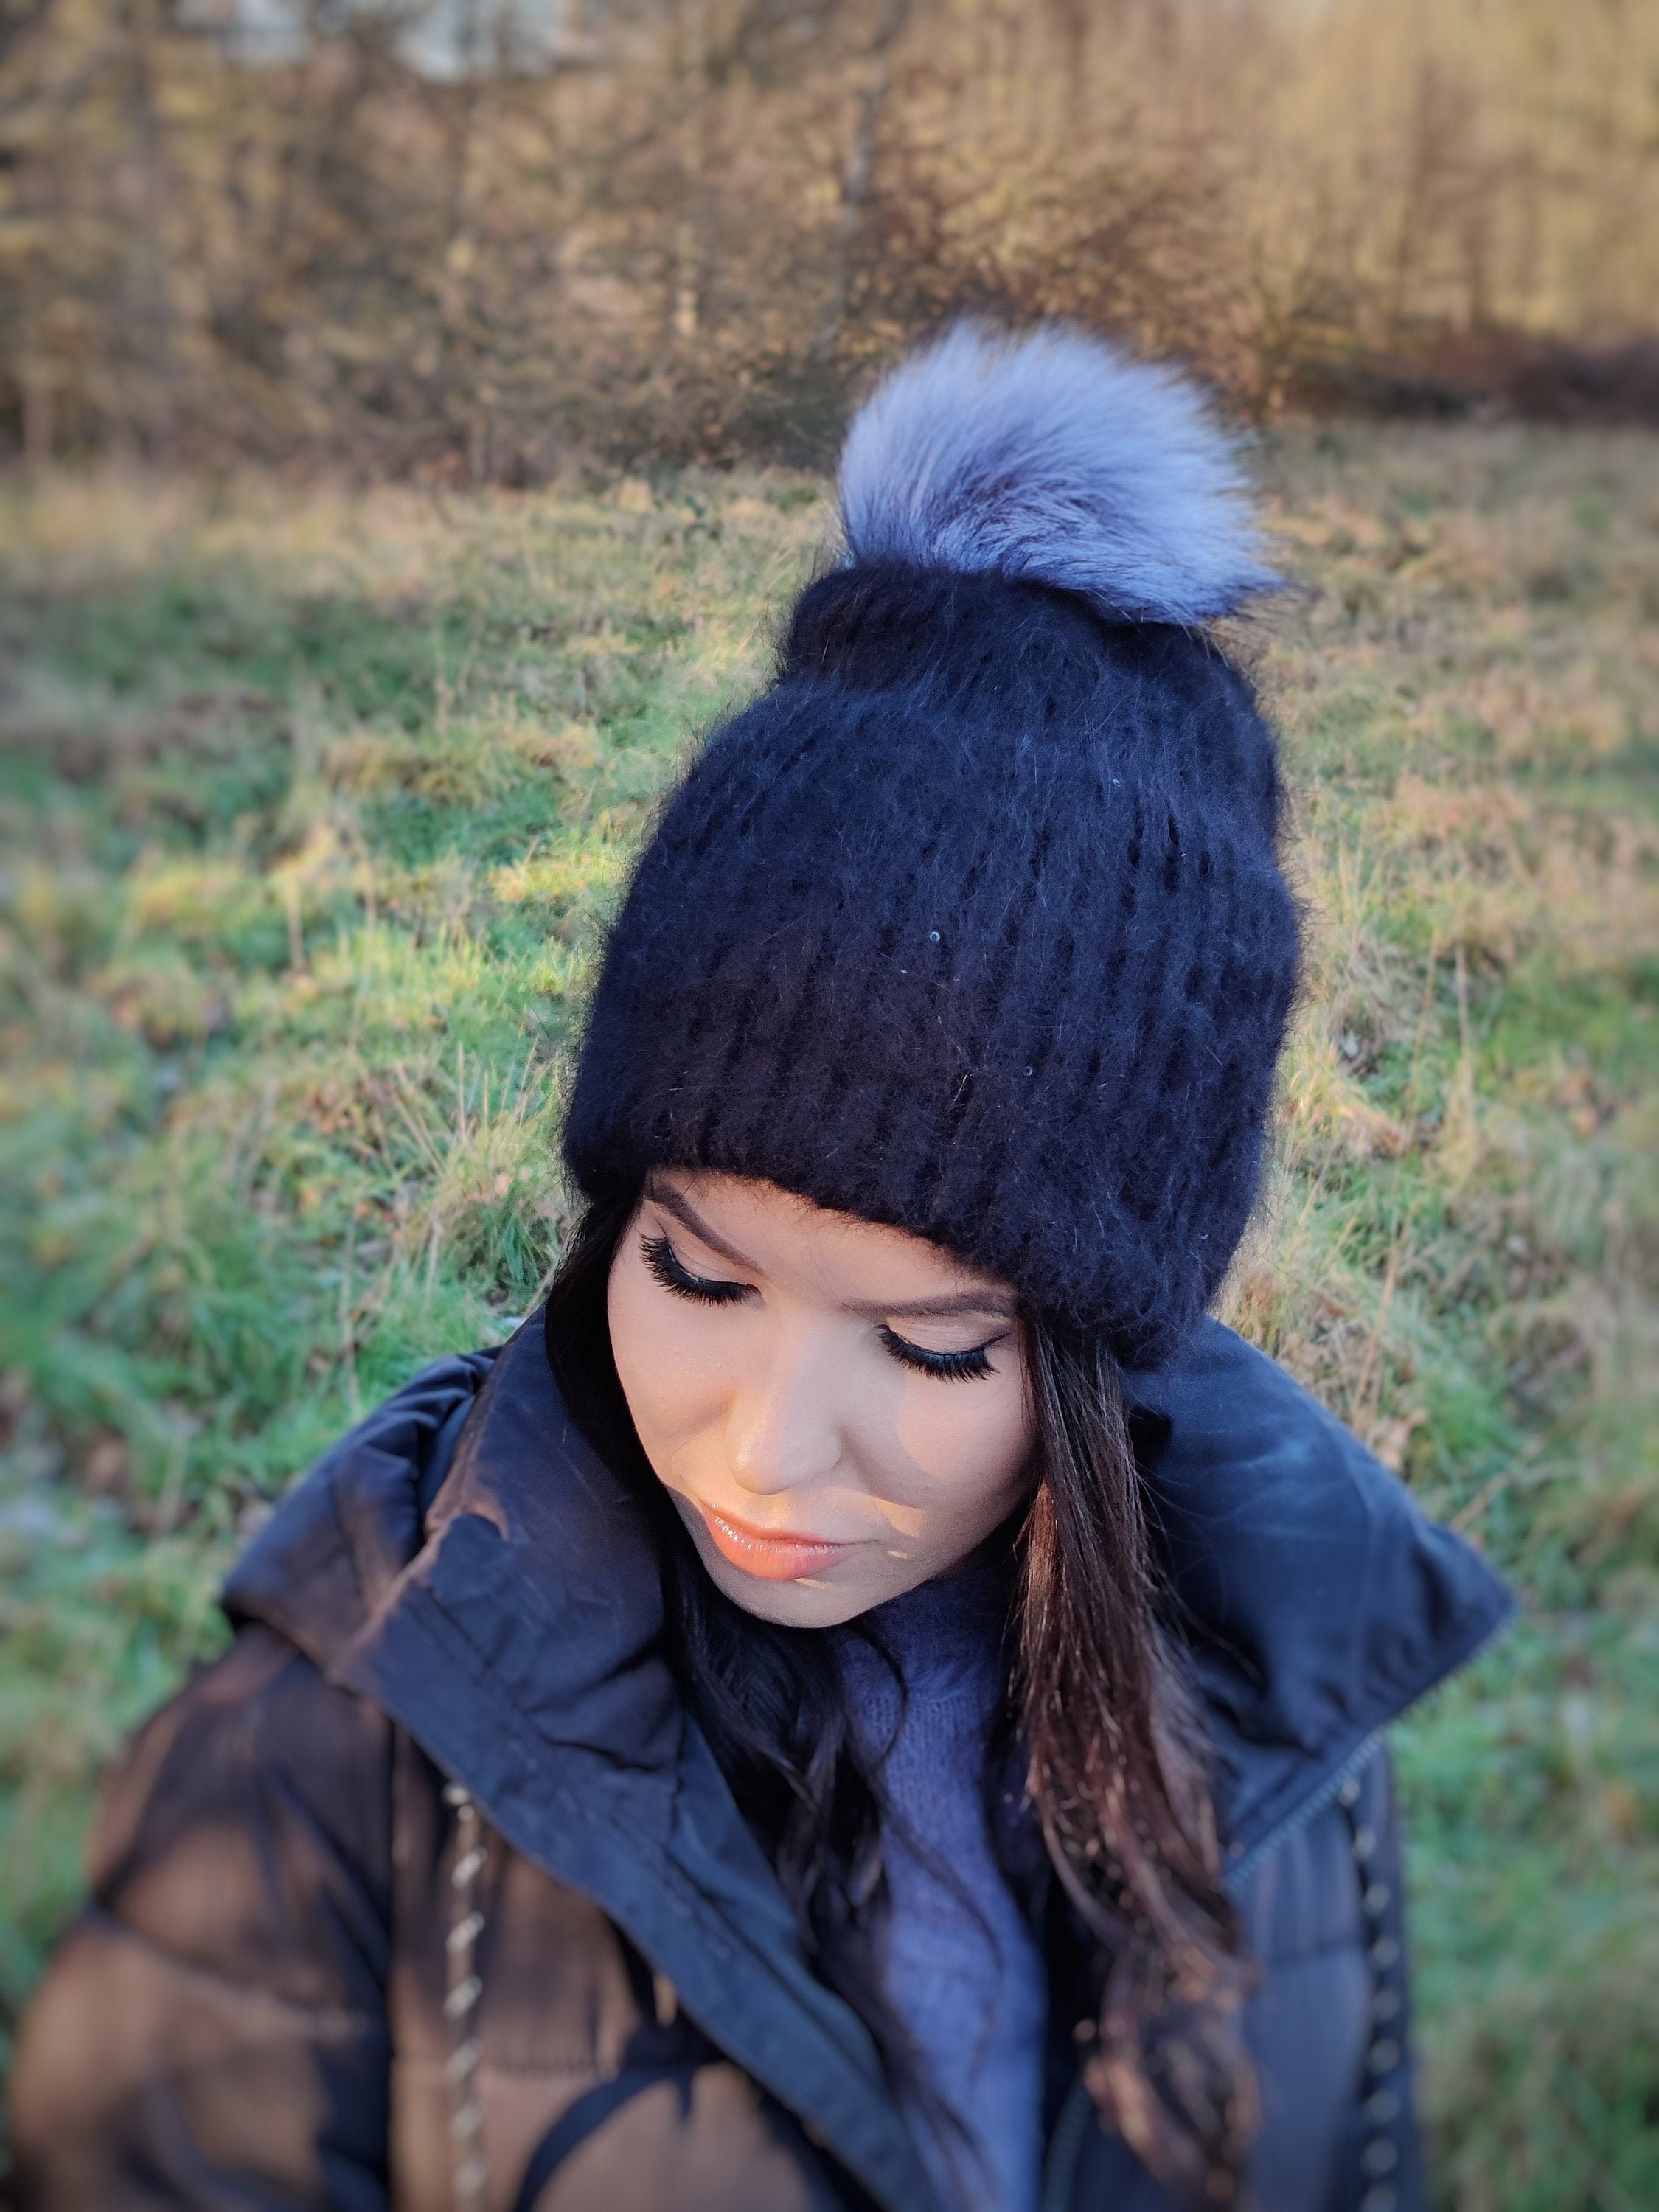 Cashmere Faux Fur Pom Pom Hat, Women Winter Hat, Gift for Her 